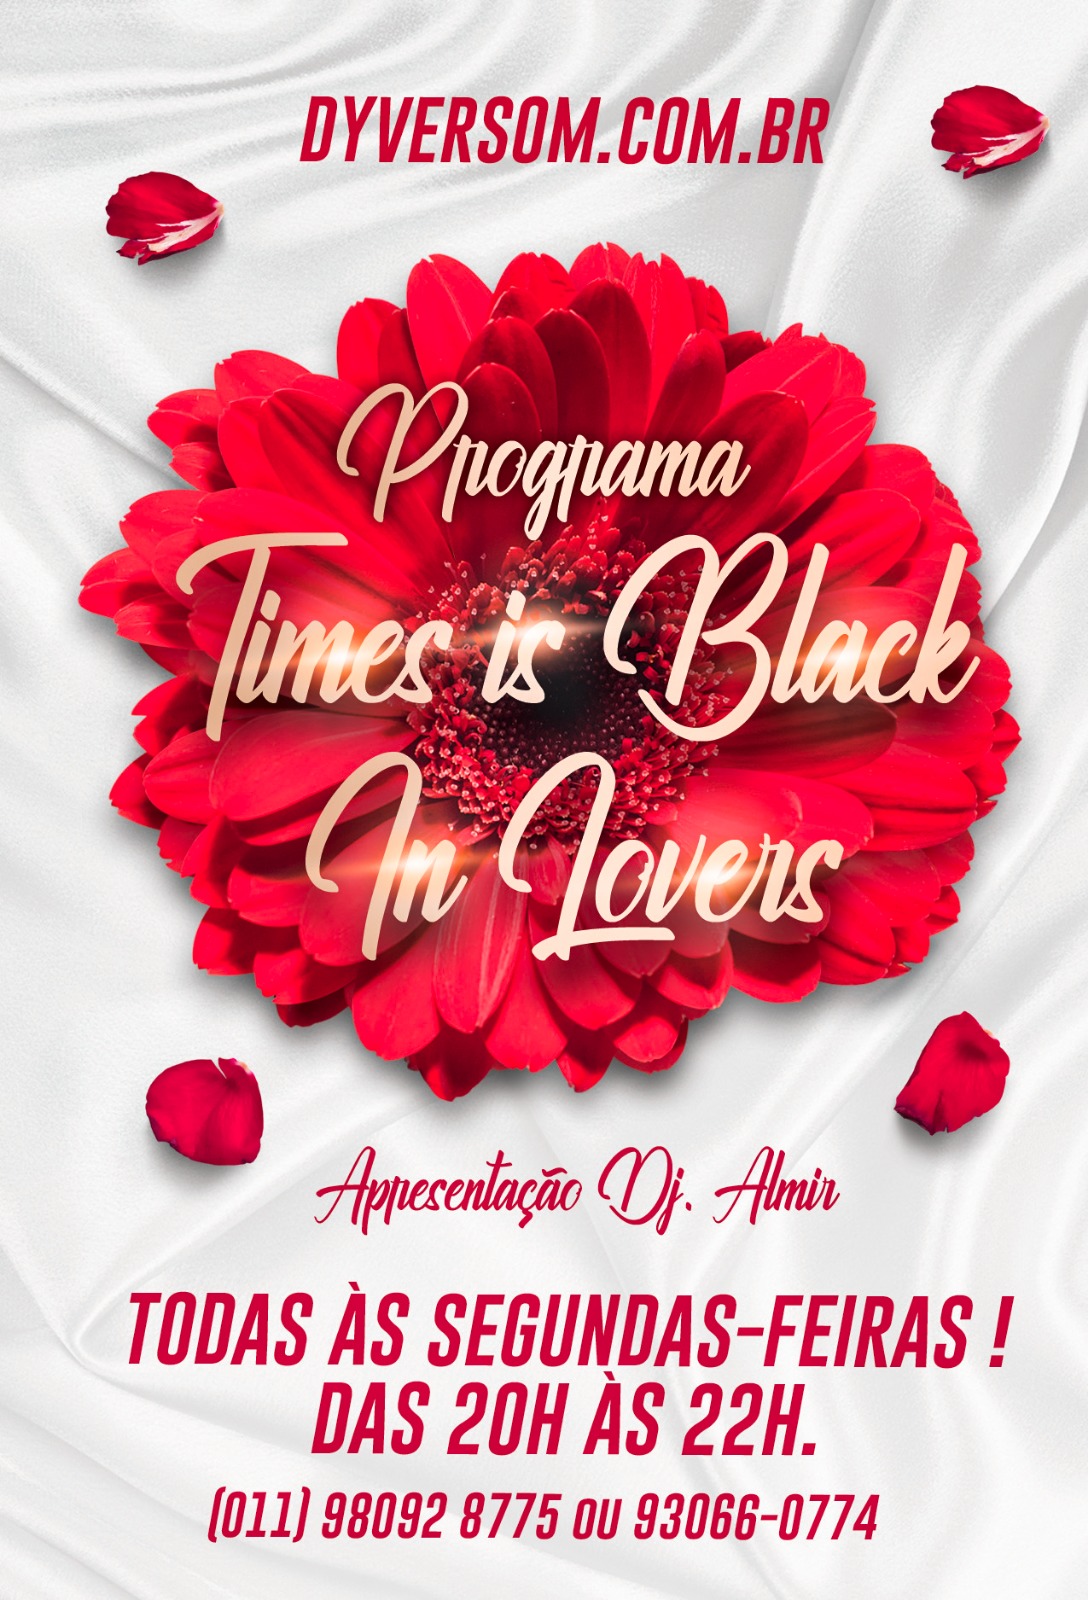 TIMES BLACK IN LOVERS .....